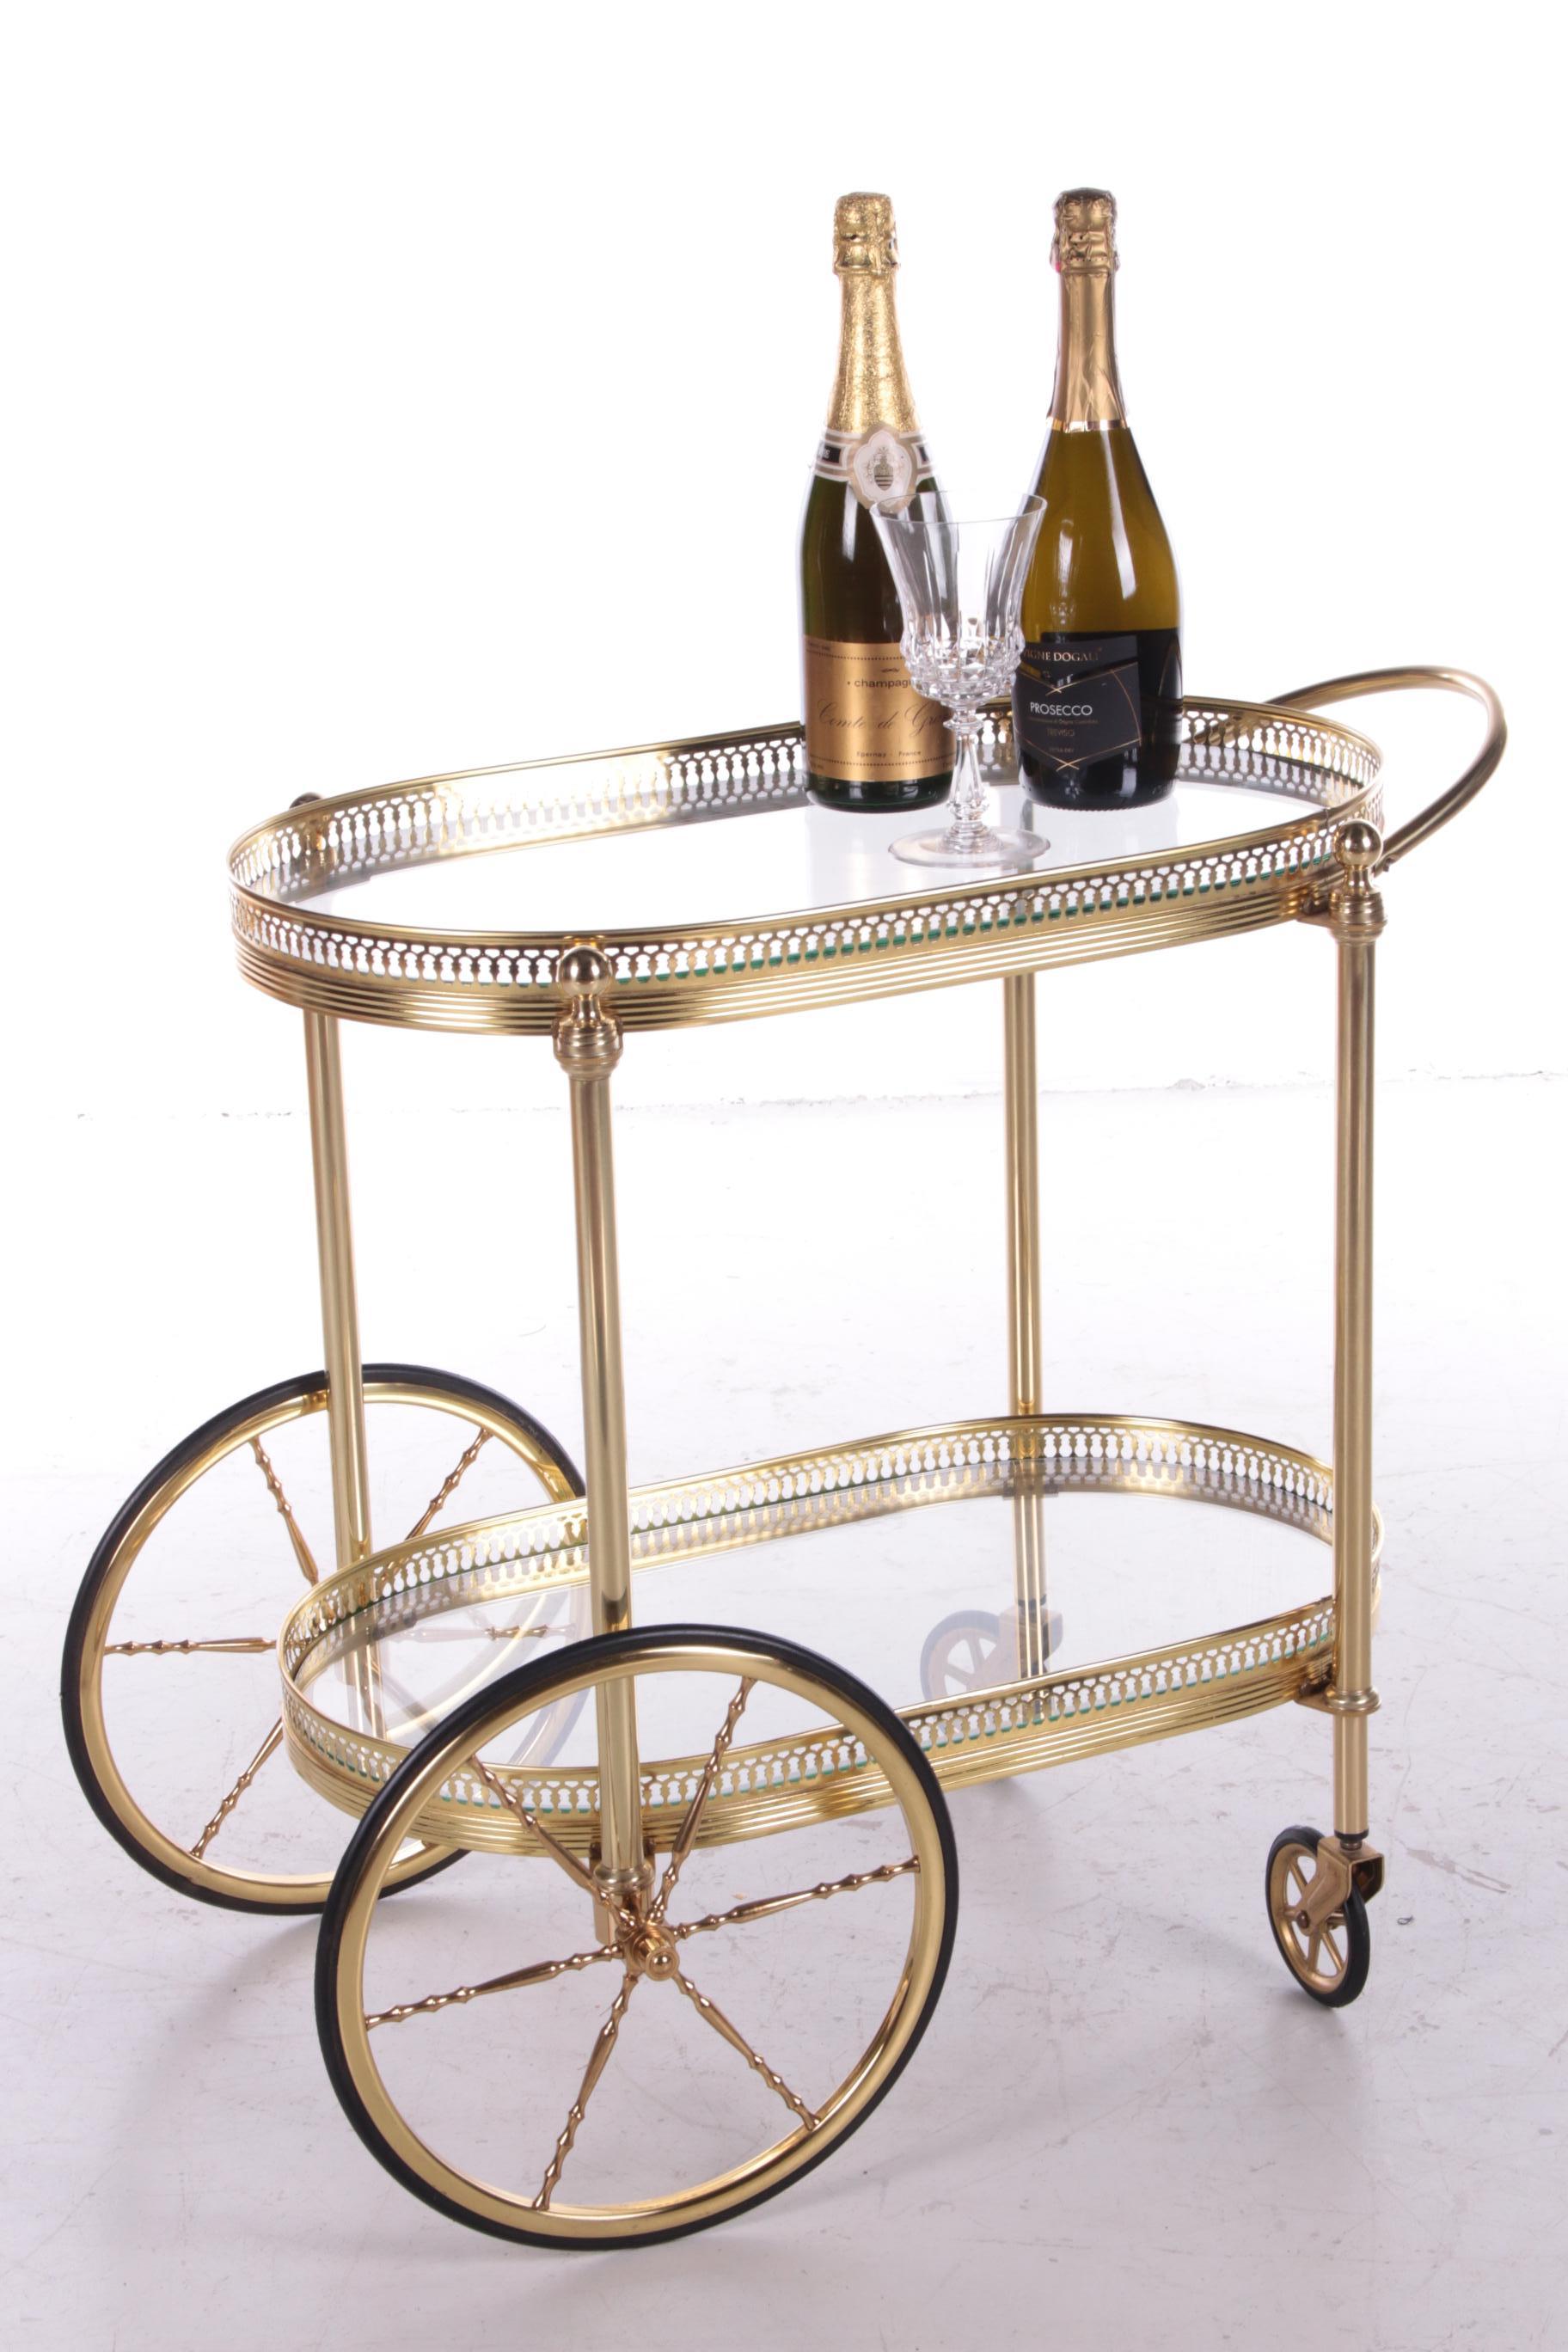 Trolley in the style of Maison Jansen Hollywood Regency, 1960s


A beautiful Maison Jansen brass vintage trolley with two layers. This is a trolley in the style of.Beautiful oval in shape with a brass frame and glass plates.

Maison Jansen was